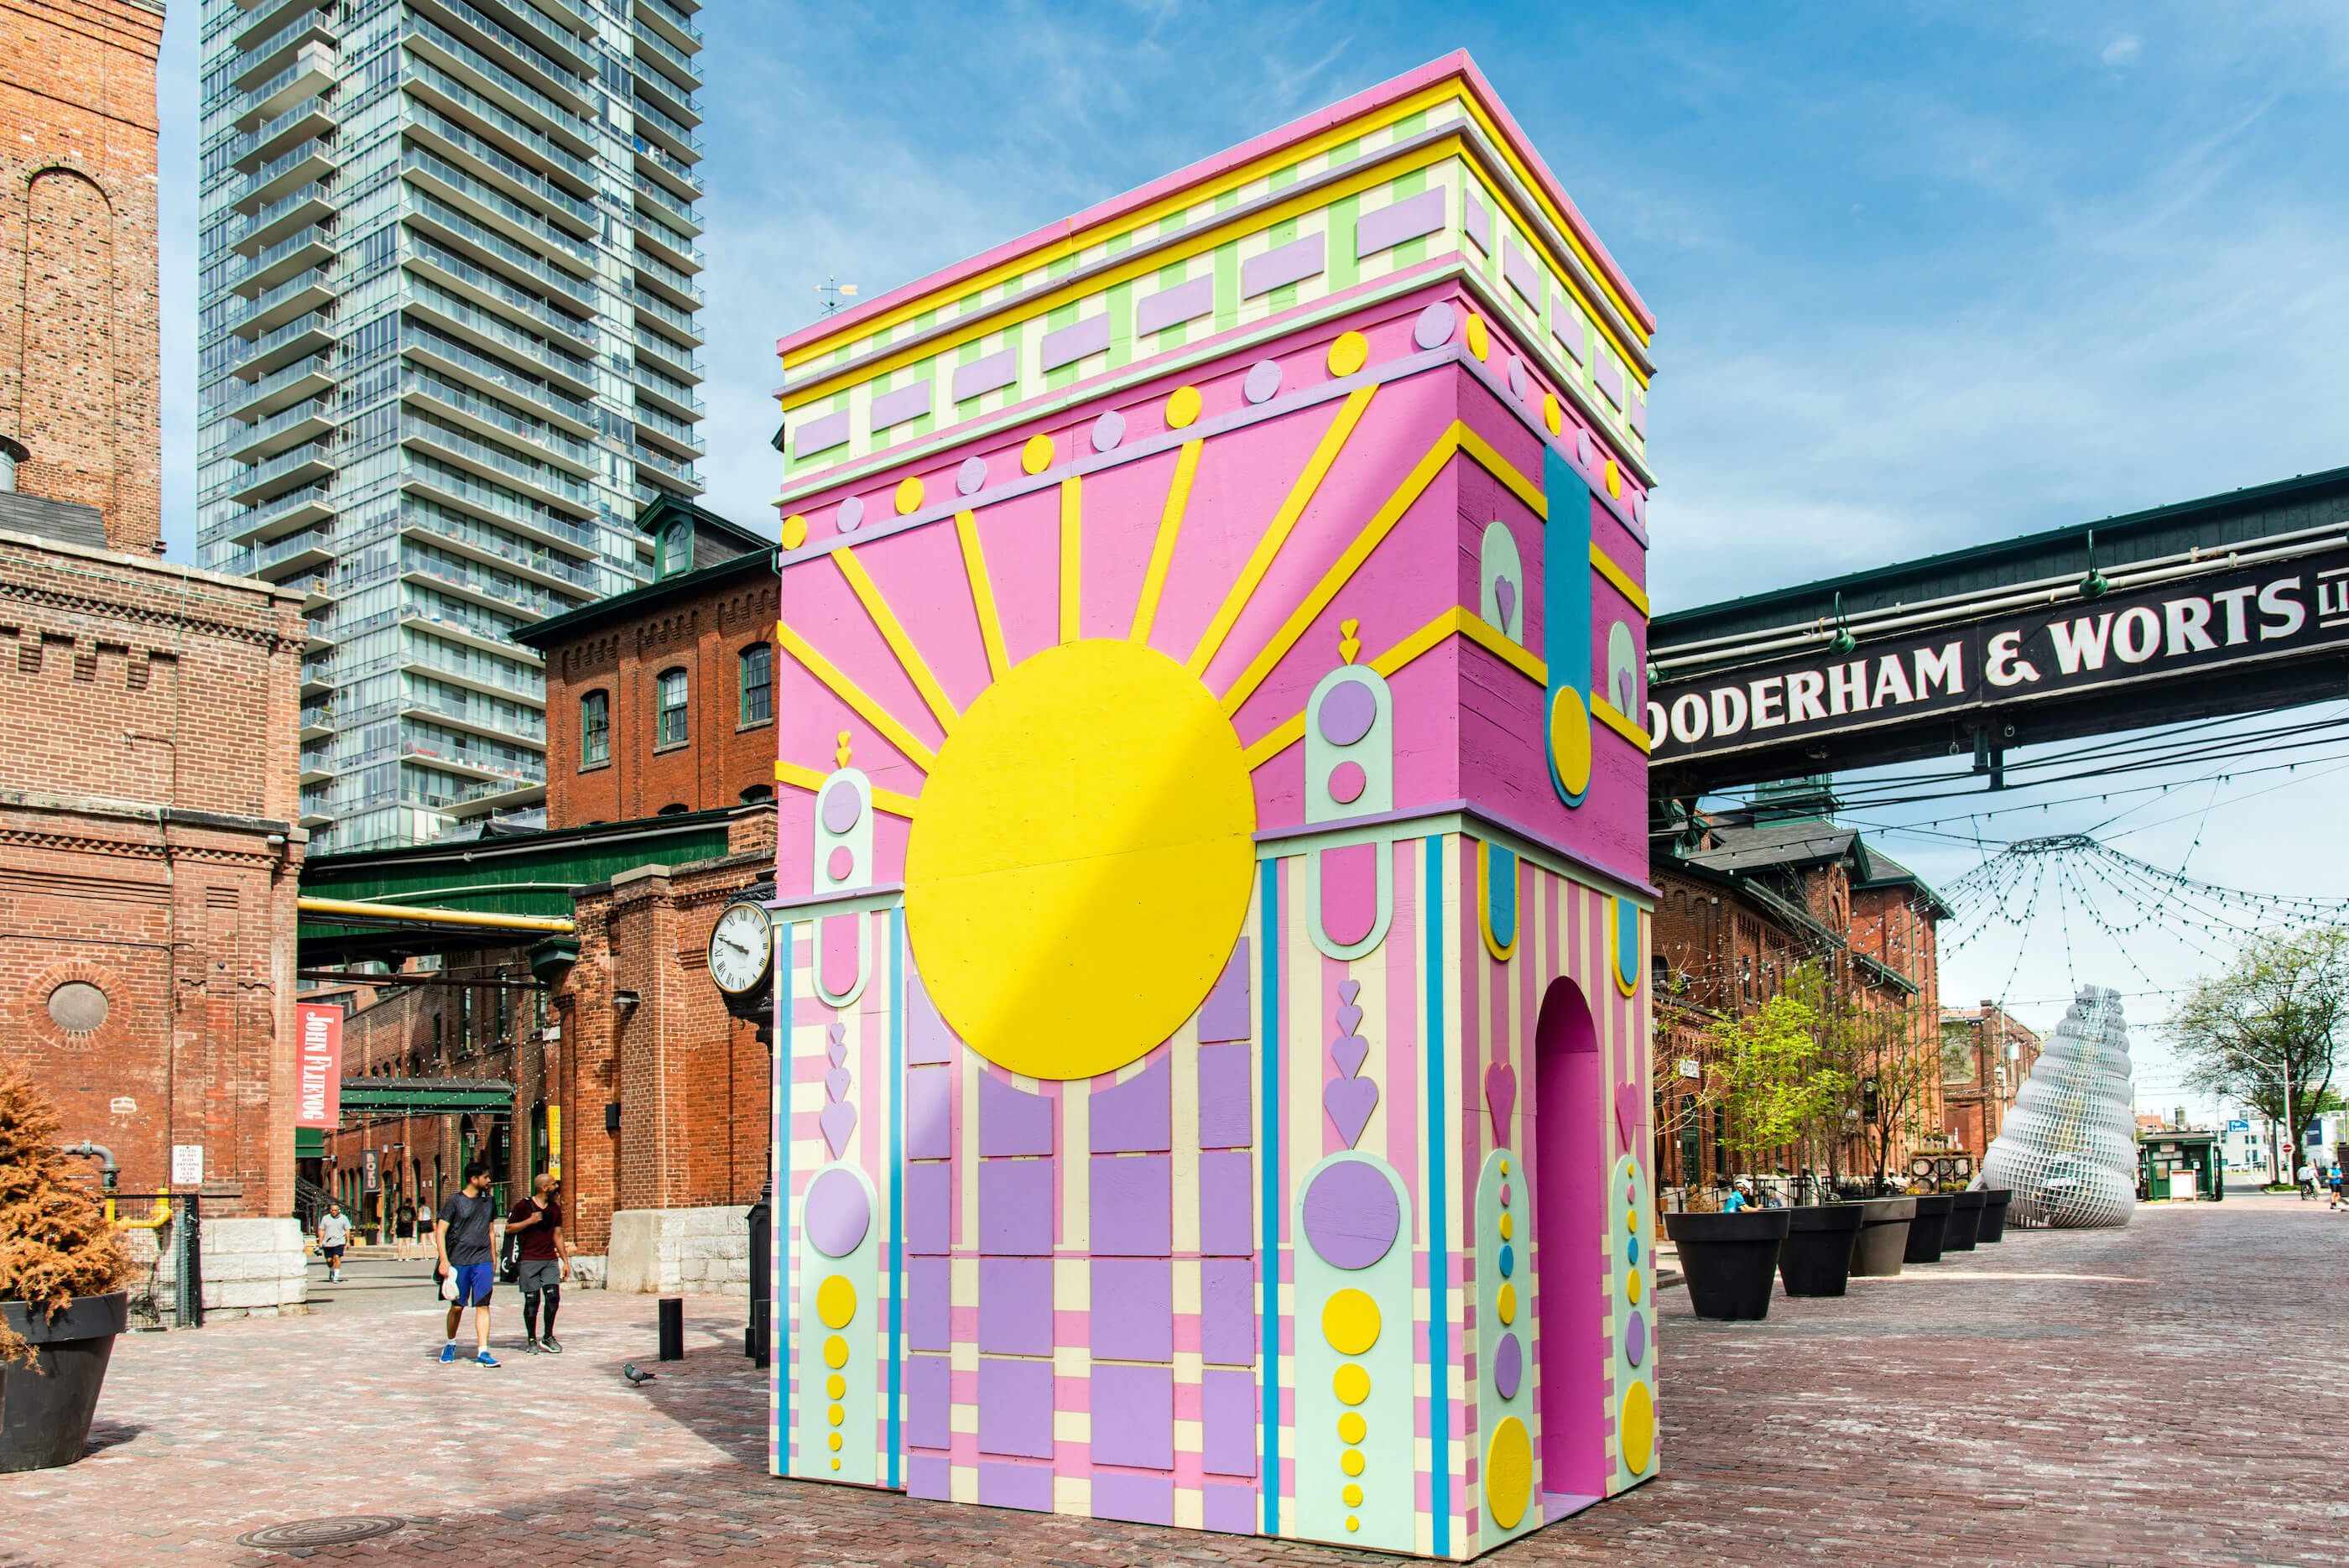 a pastel-colored installation place in busy public square